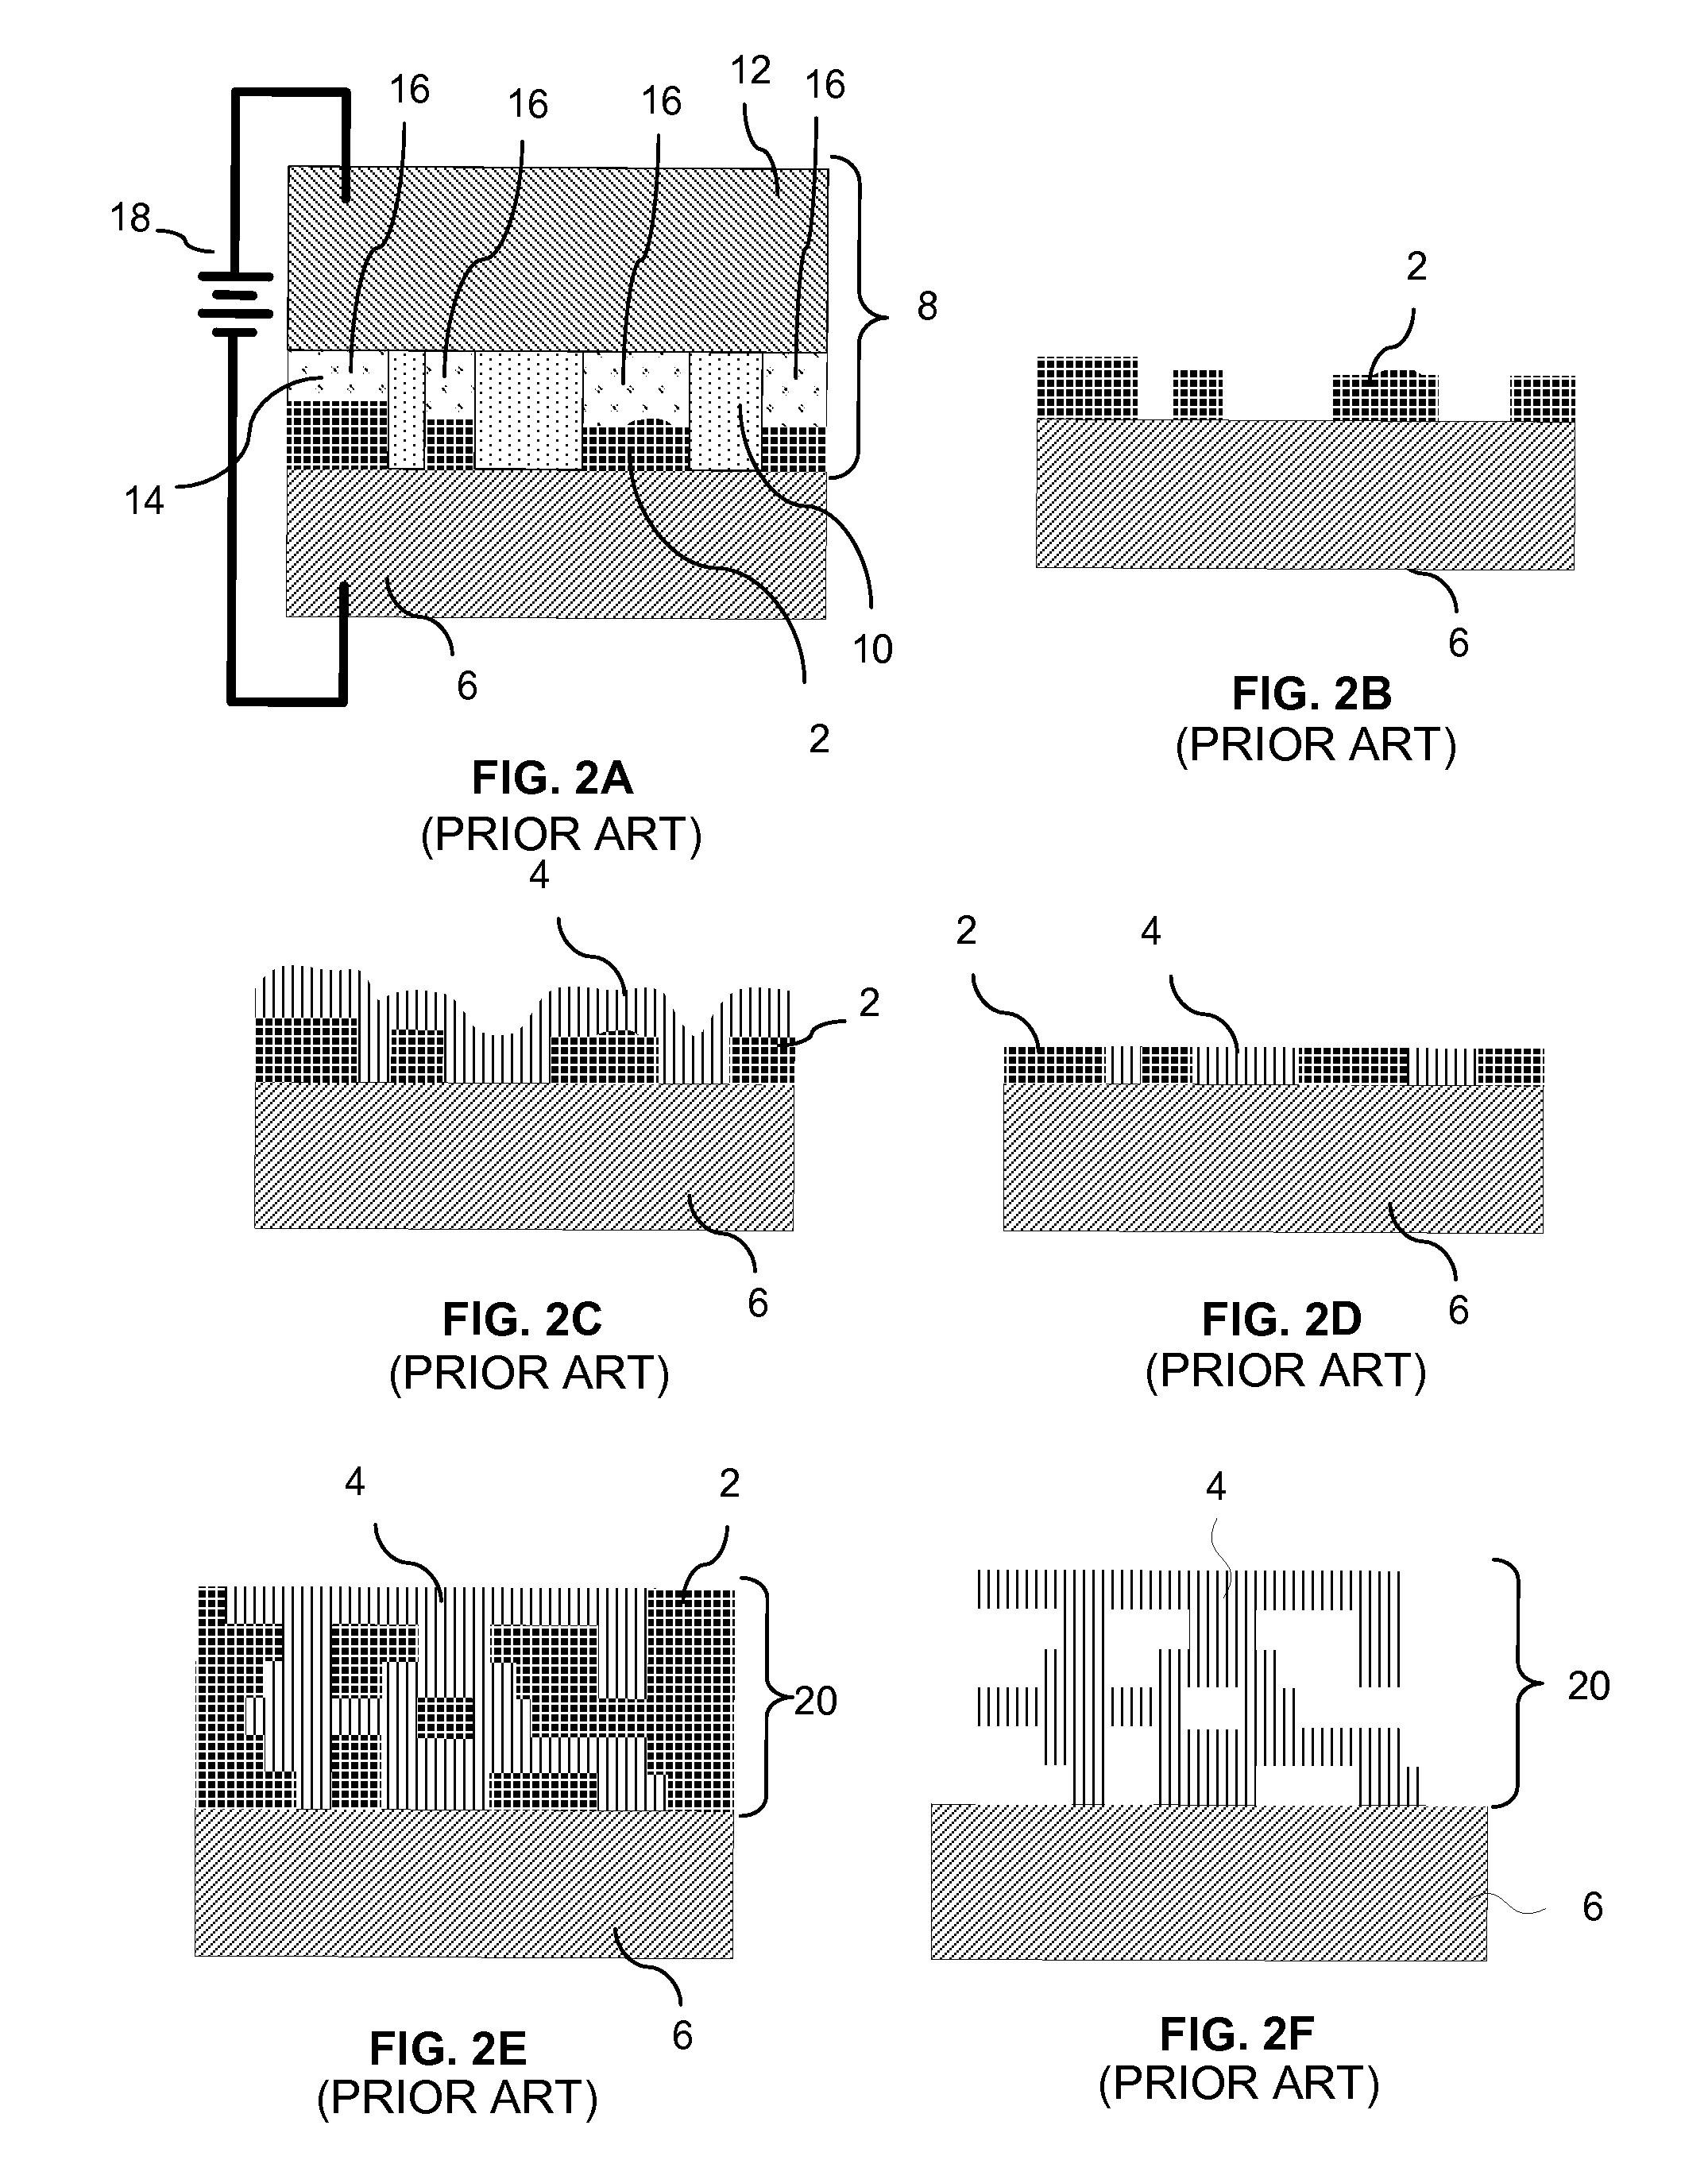 Multi-layer three-dimensional structures having features smaller than a minimum feature size associated with the formation of individual layers